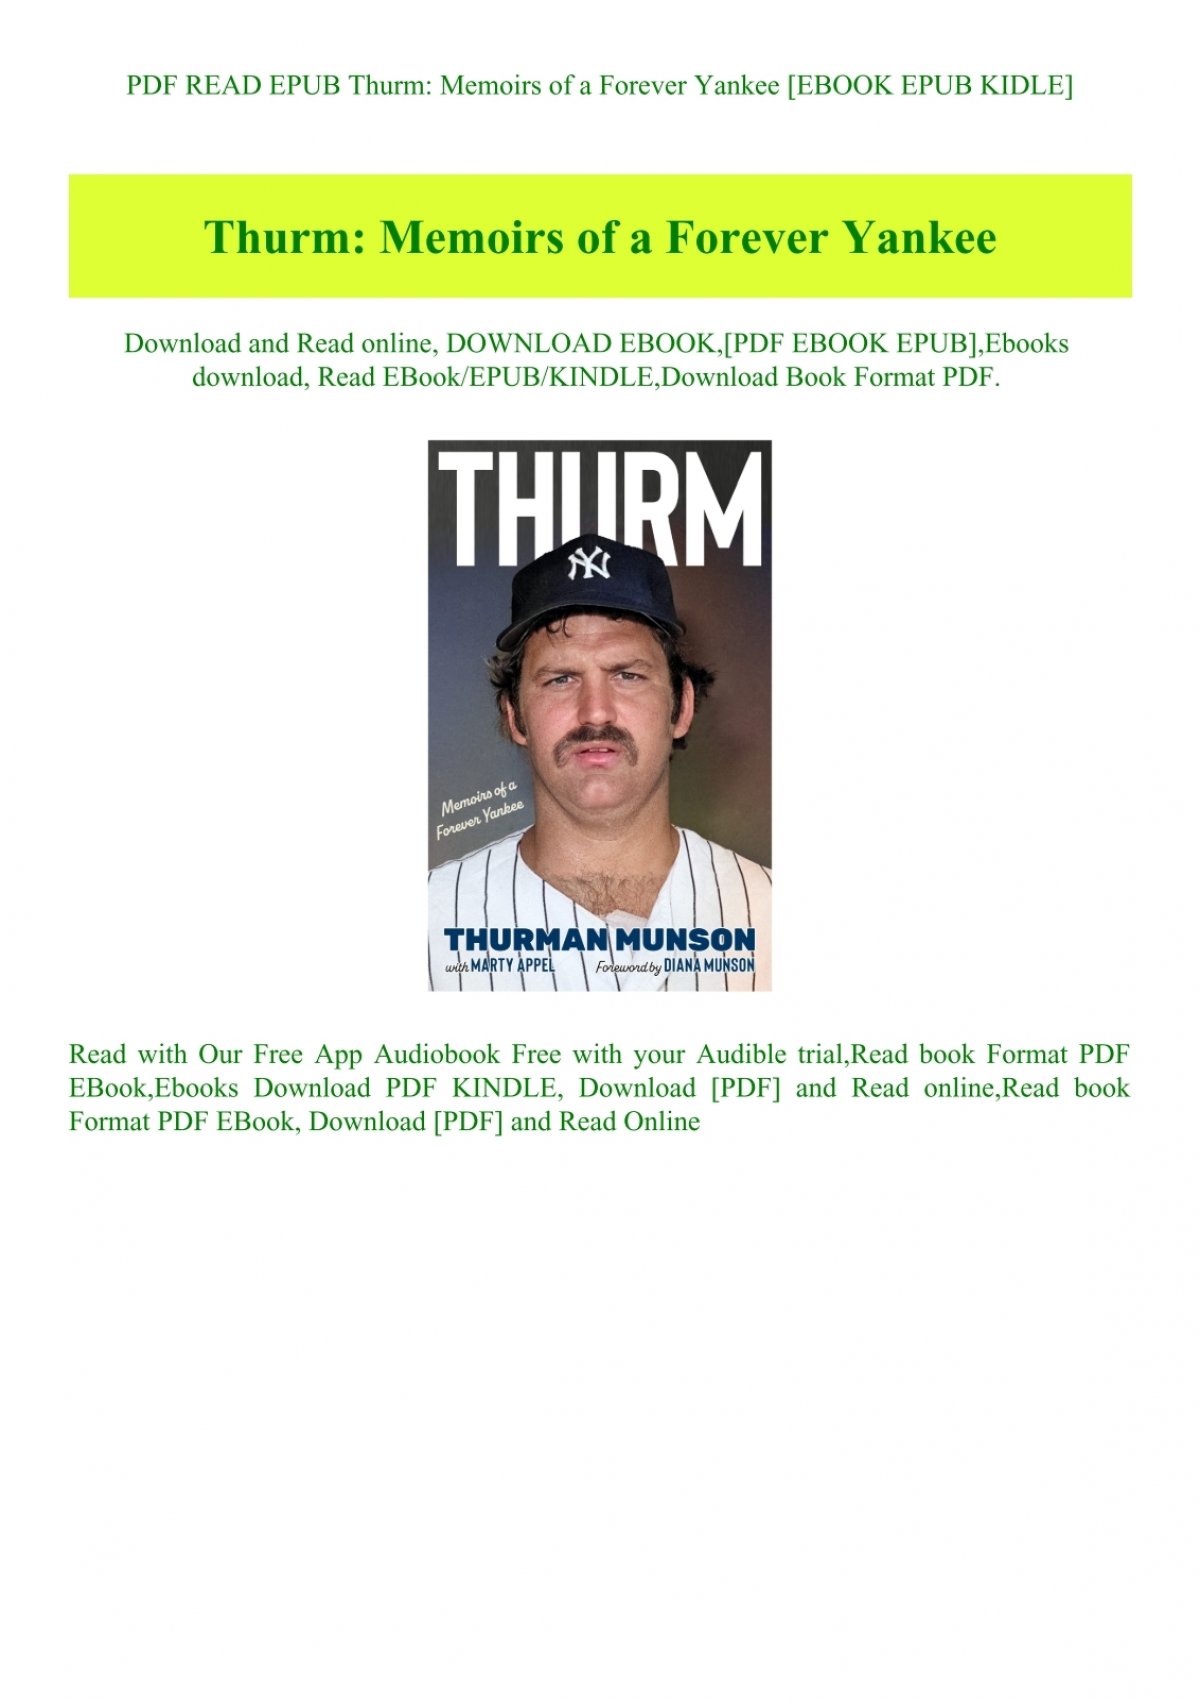 Thurm: Memoirs of a Forever Yankee: Munson, Thurman, Appel, Marty